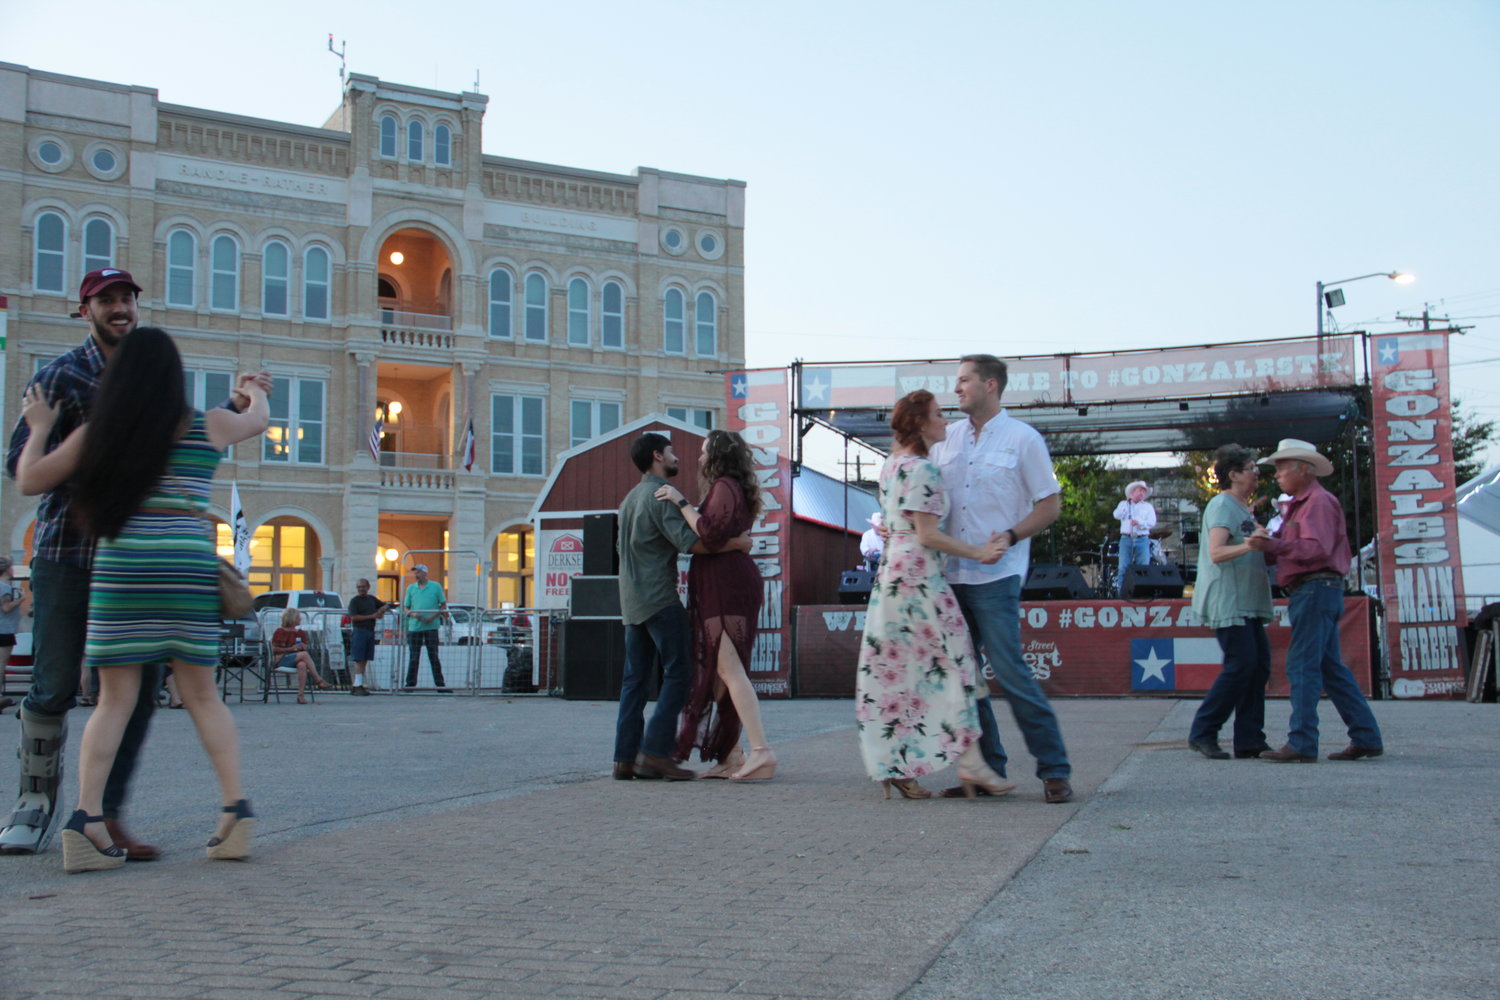 The Gonzales Main Street Concert Series kicks off this Friday with Five Card Draw headlining the June 7 show. Concert grounds will open at 6 p.m.